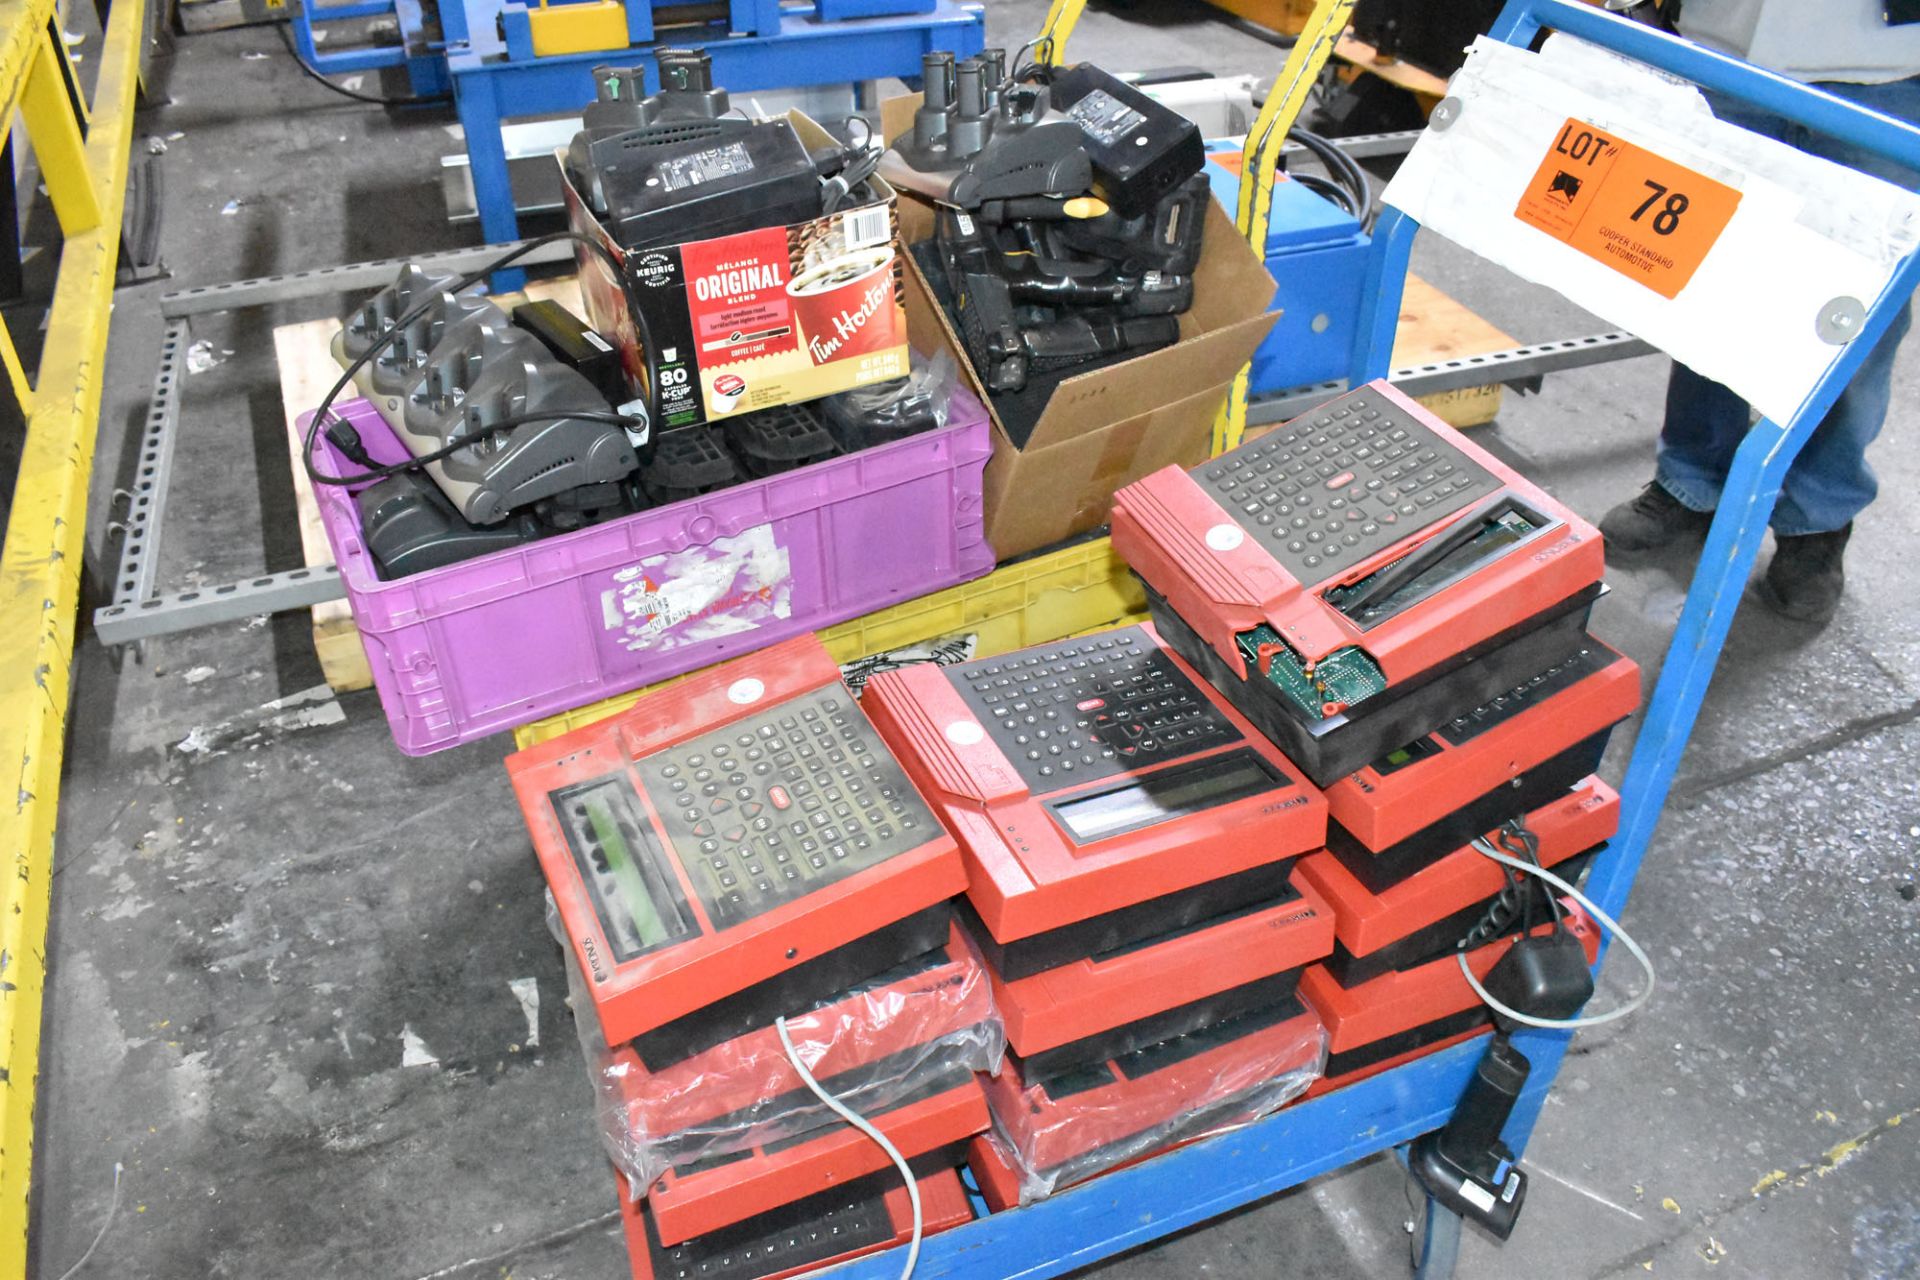 LOT/ MOTOROLA HANDHELD BARCODE SCANNERS (APPROX. 25) WITH SPARE BATTERIES, CHARGERS, CASES, AND